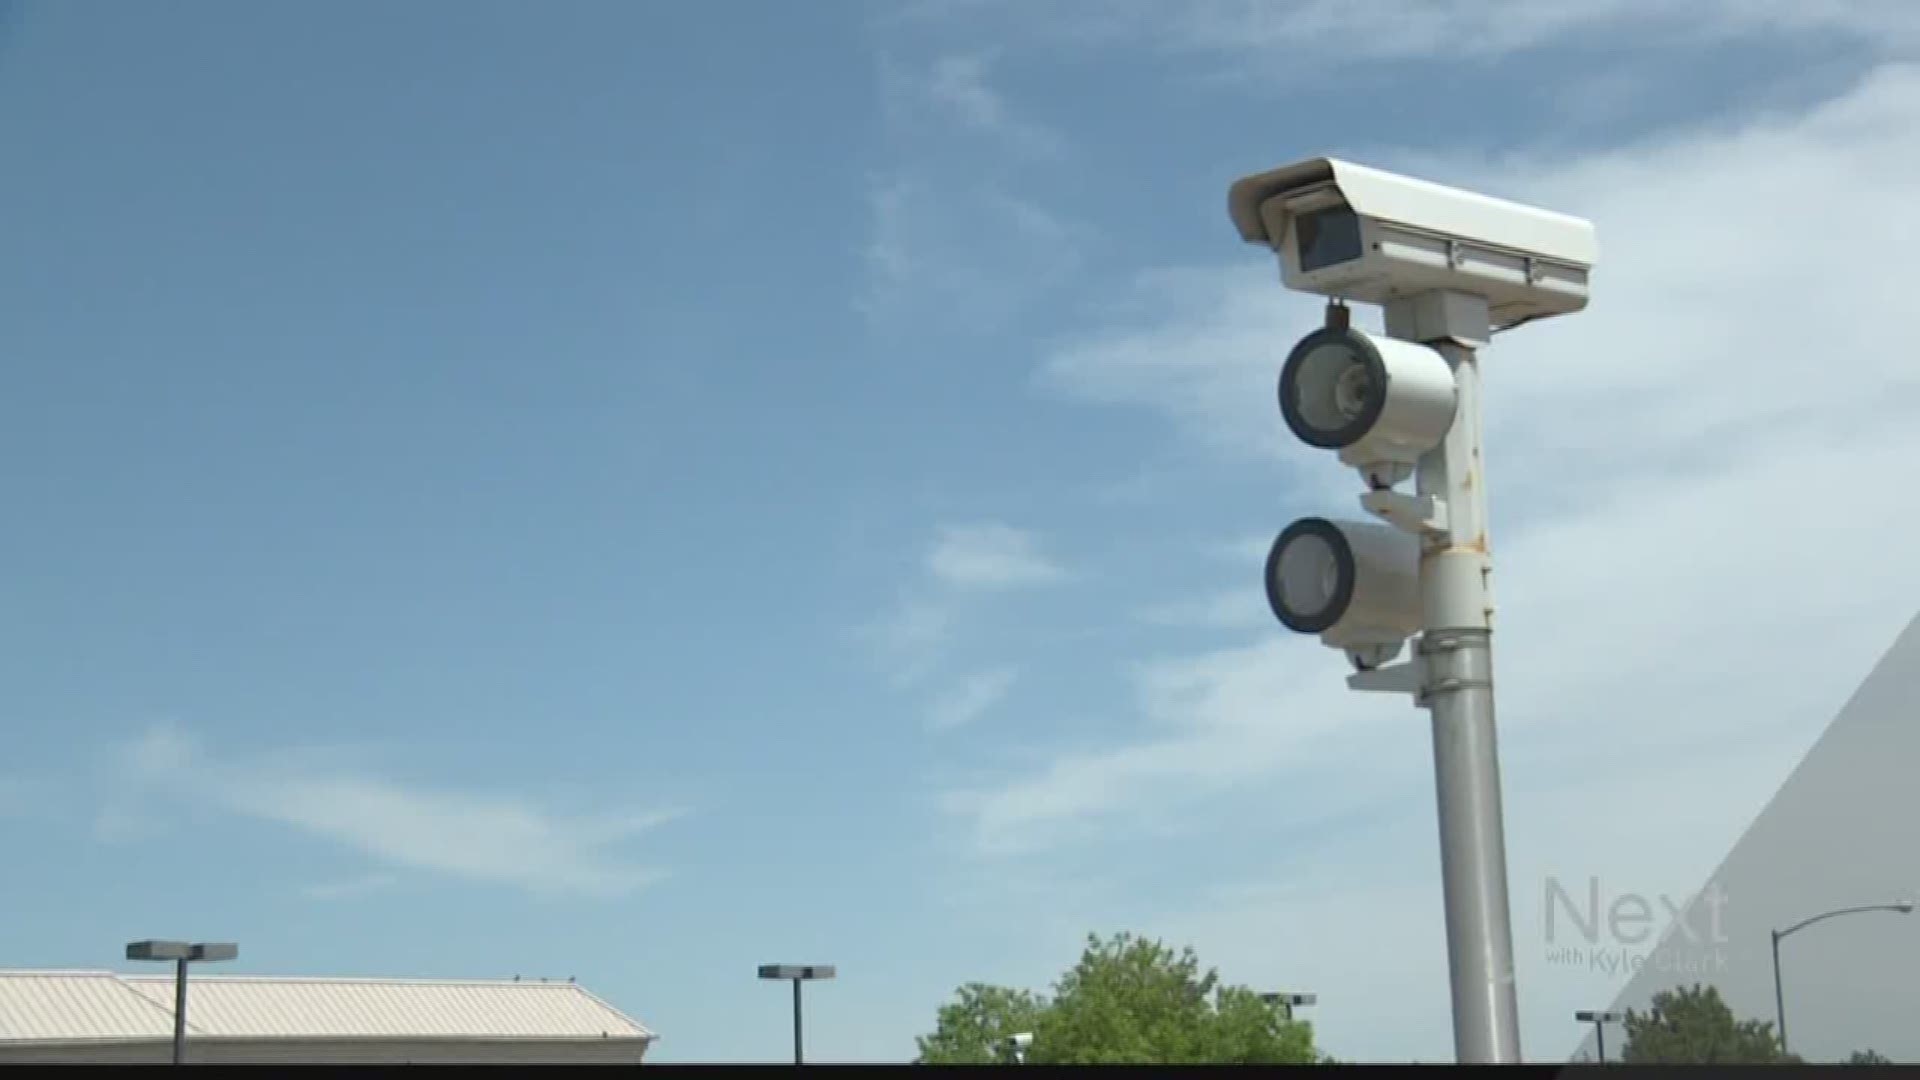 The way to avoid a red light camera ticket is not to run a red light. The second best way to avoid them is to vote the cameras out of existence. Right now, Aurora City Council is discussing letting voters do that in November.